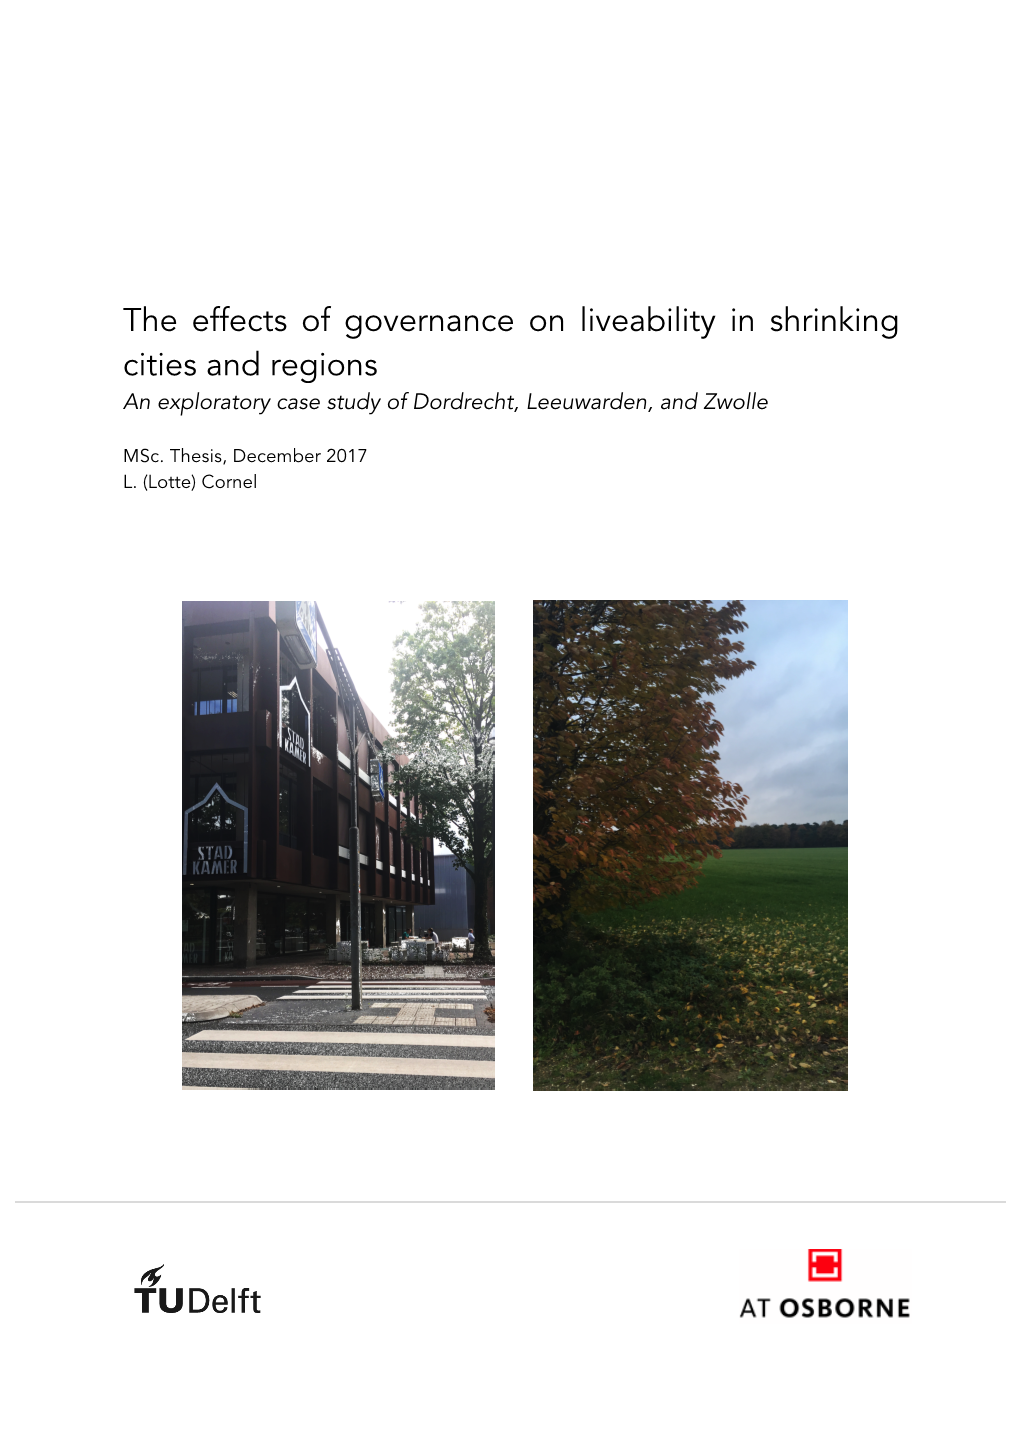 The Effects of Governance on Liveability in Shrinking Cities and Regions an Exploratory Case Study of Dordrecht, Leeuwarden, and Zwolle